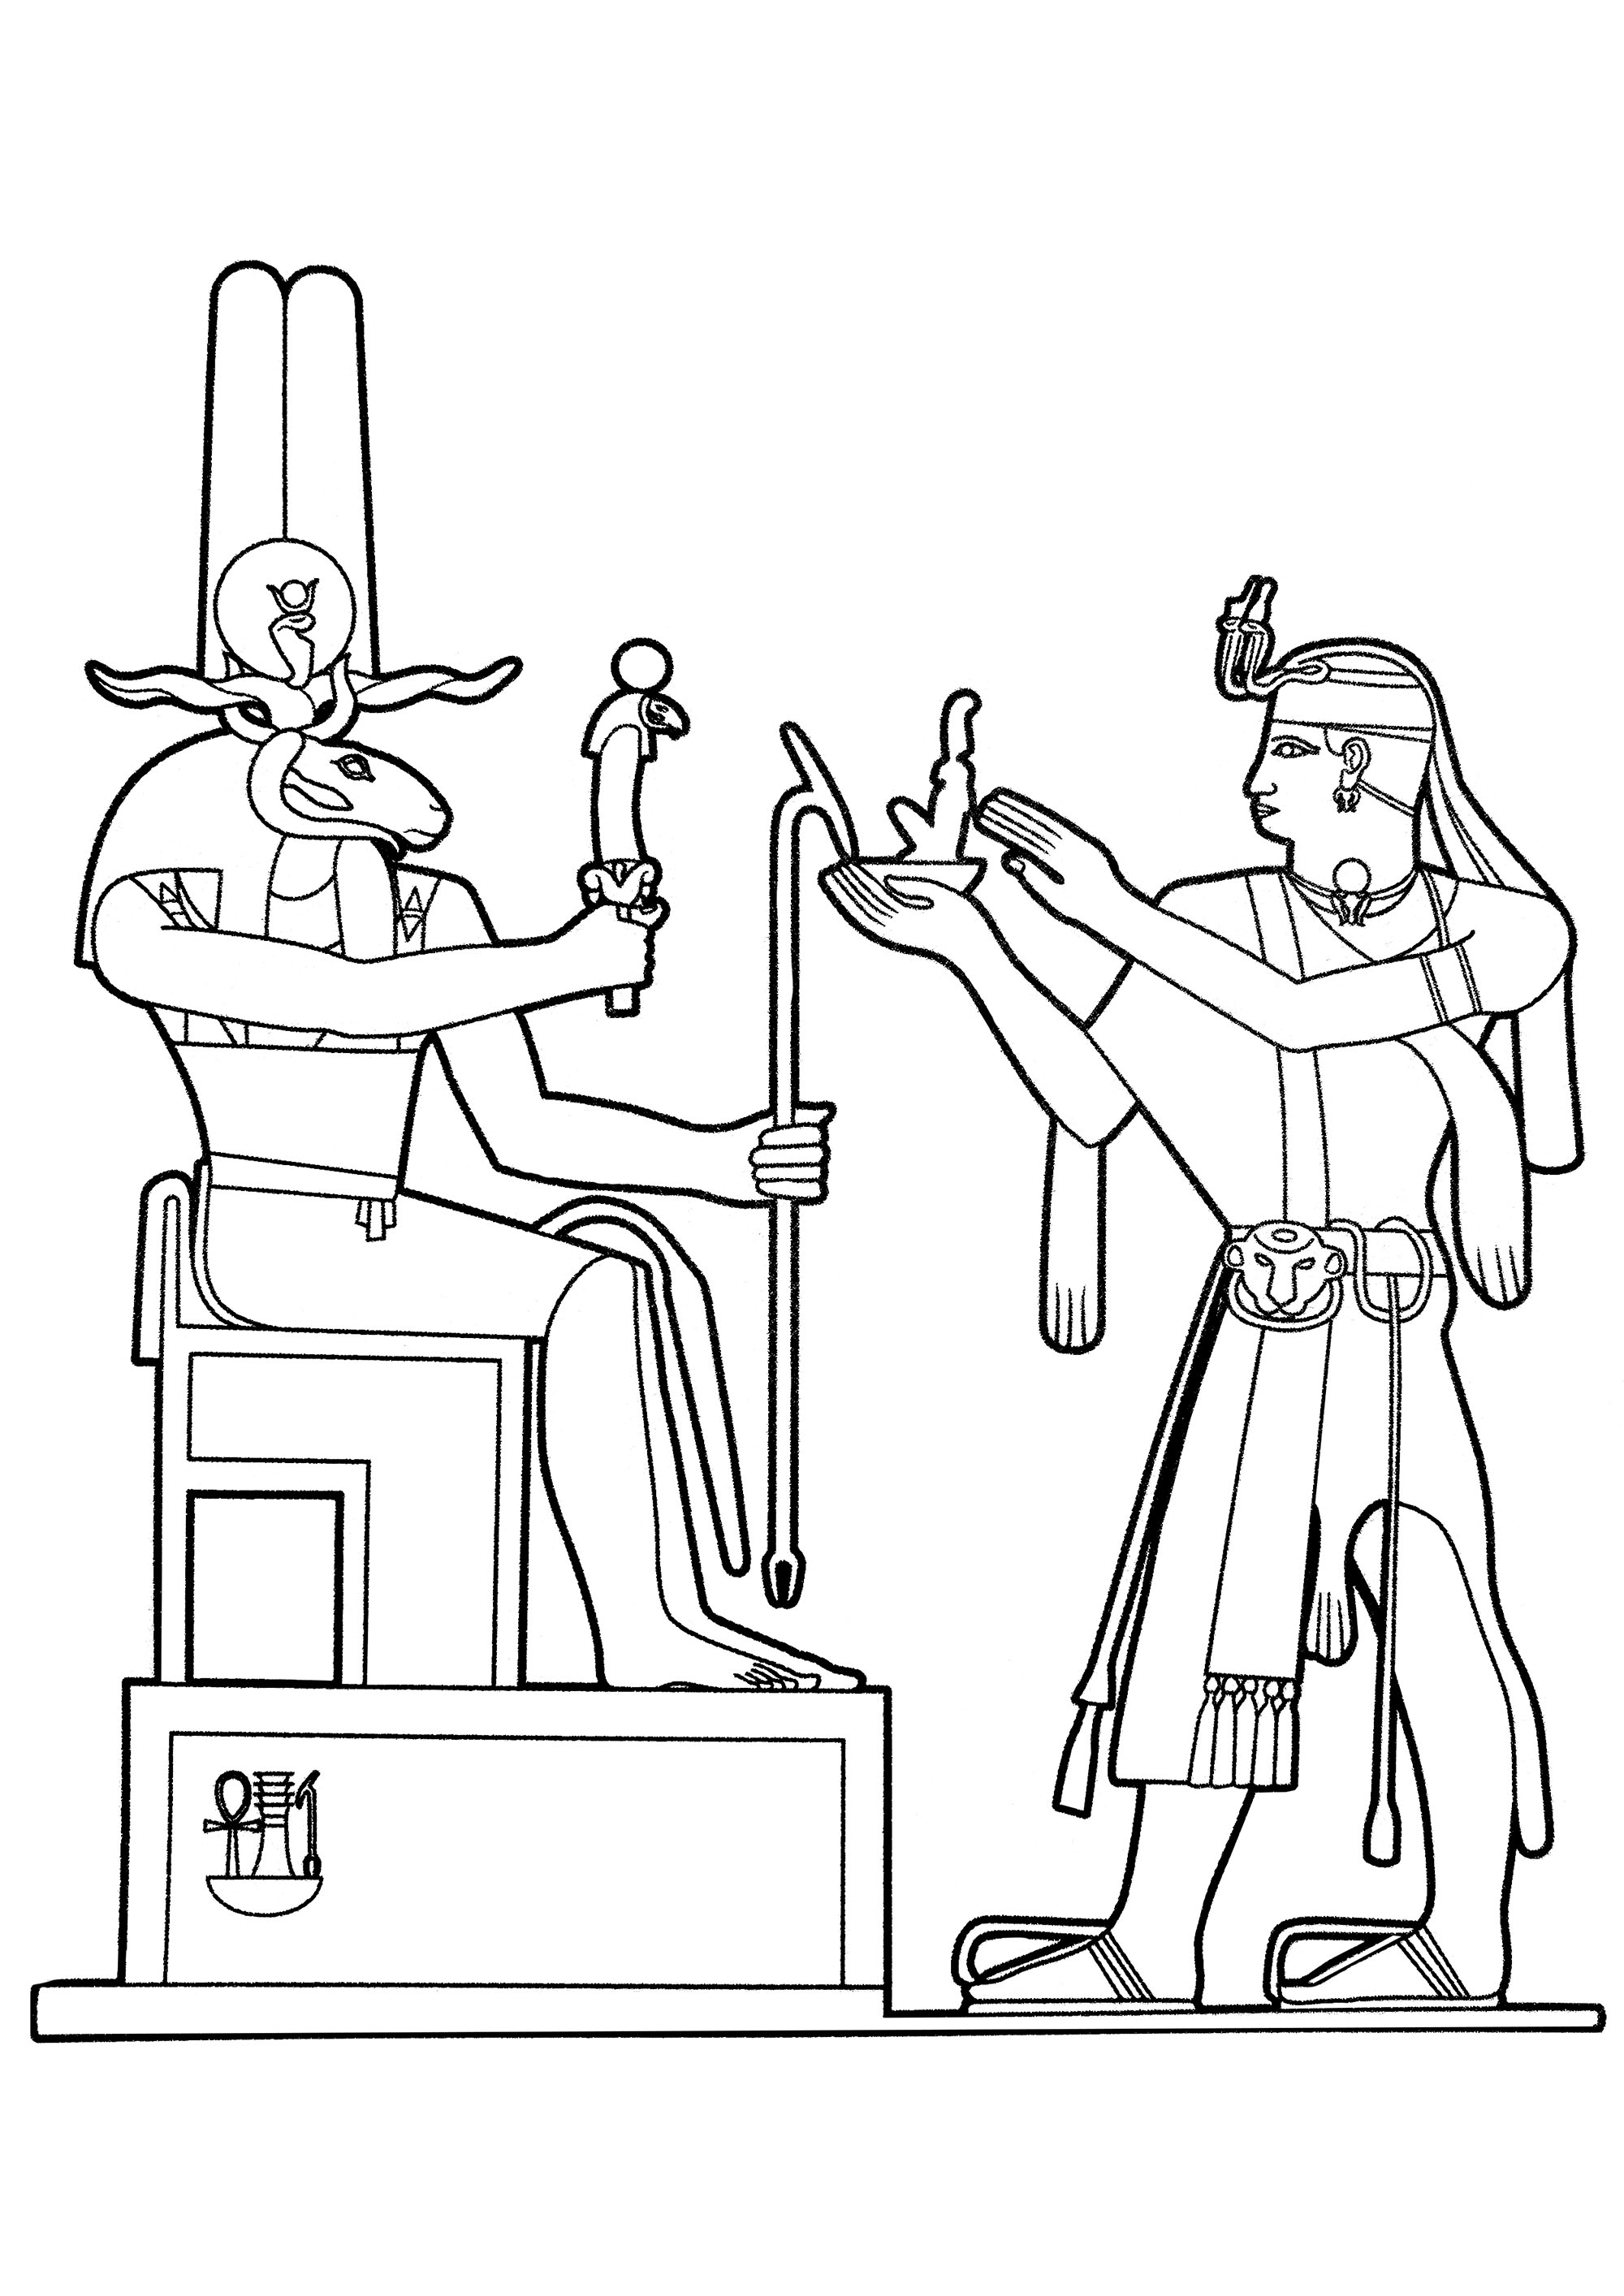 The Egyptian god Khnum receiving an offering. Khnum is a straight-horned, ram-headed god who is often depicted creating humans on his potter's wheel, Khnum emerged from two caverns in the subterranean world in the ocean of Nun.